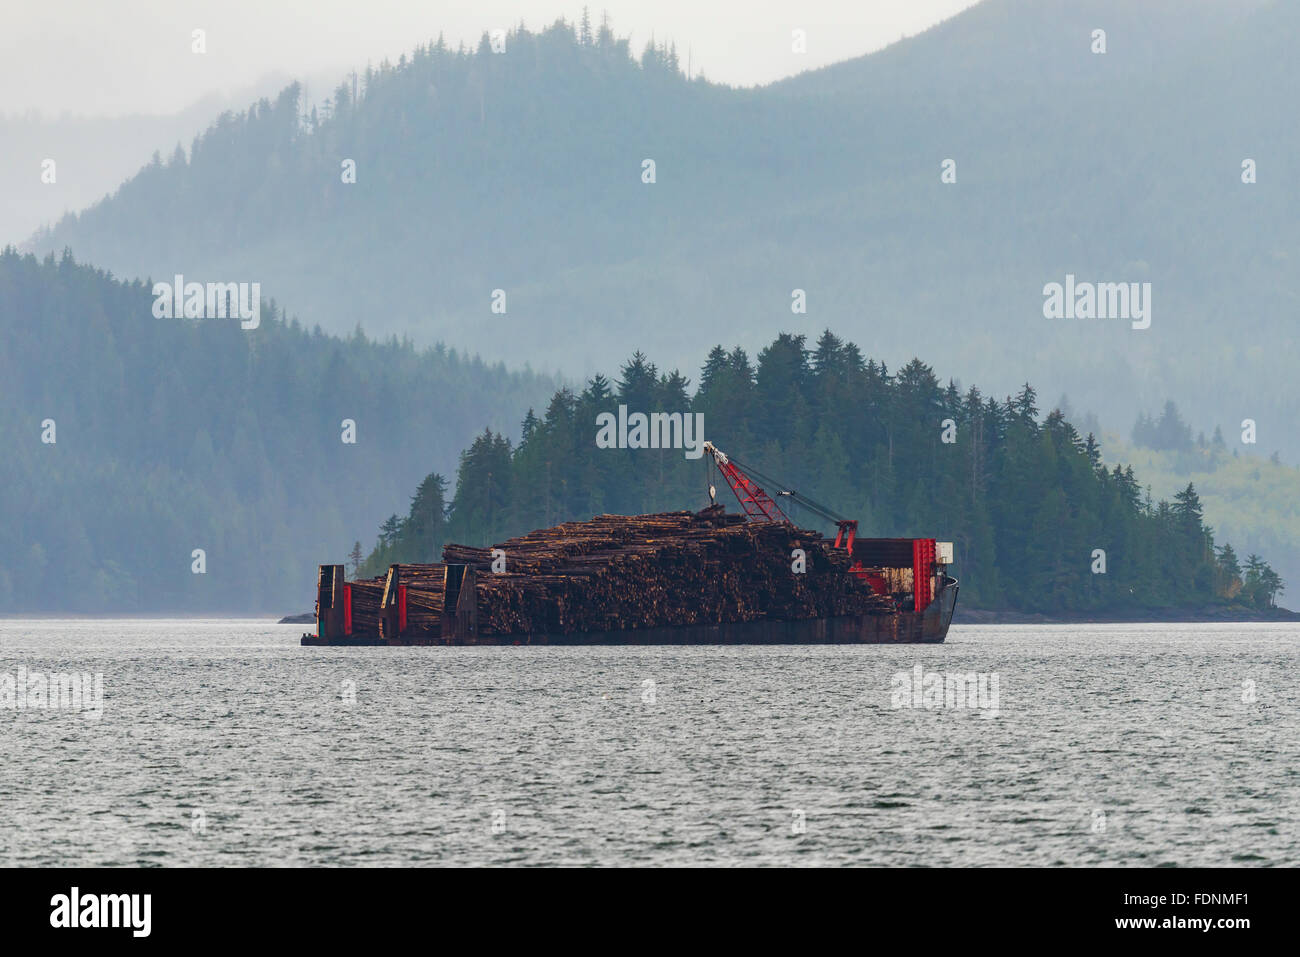 Lumber carrier cargo ship off the coast in the Pacific Northwest BC Canada Stock Photo